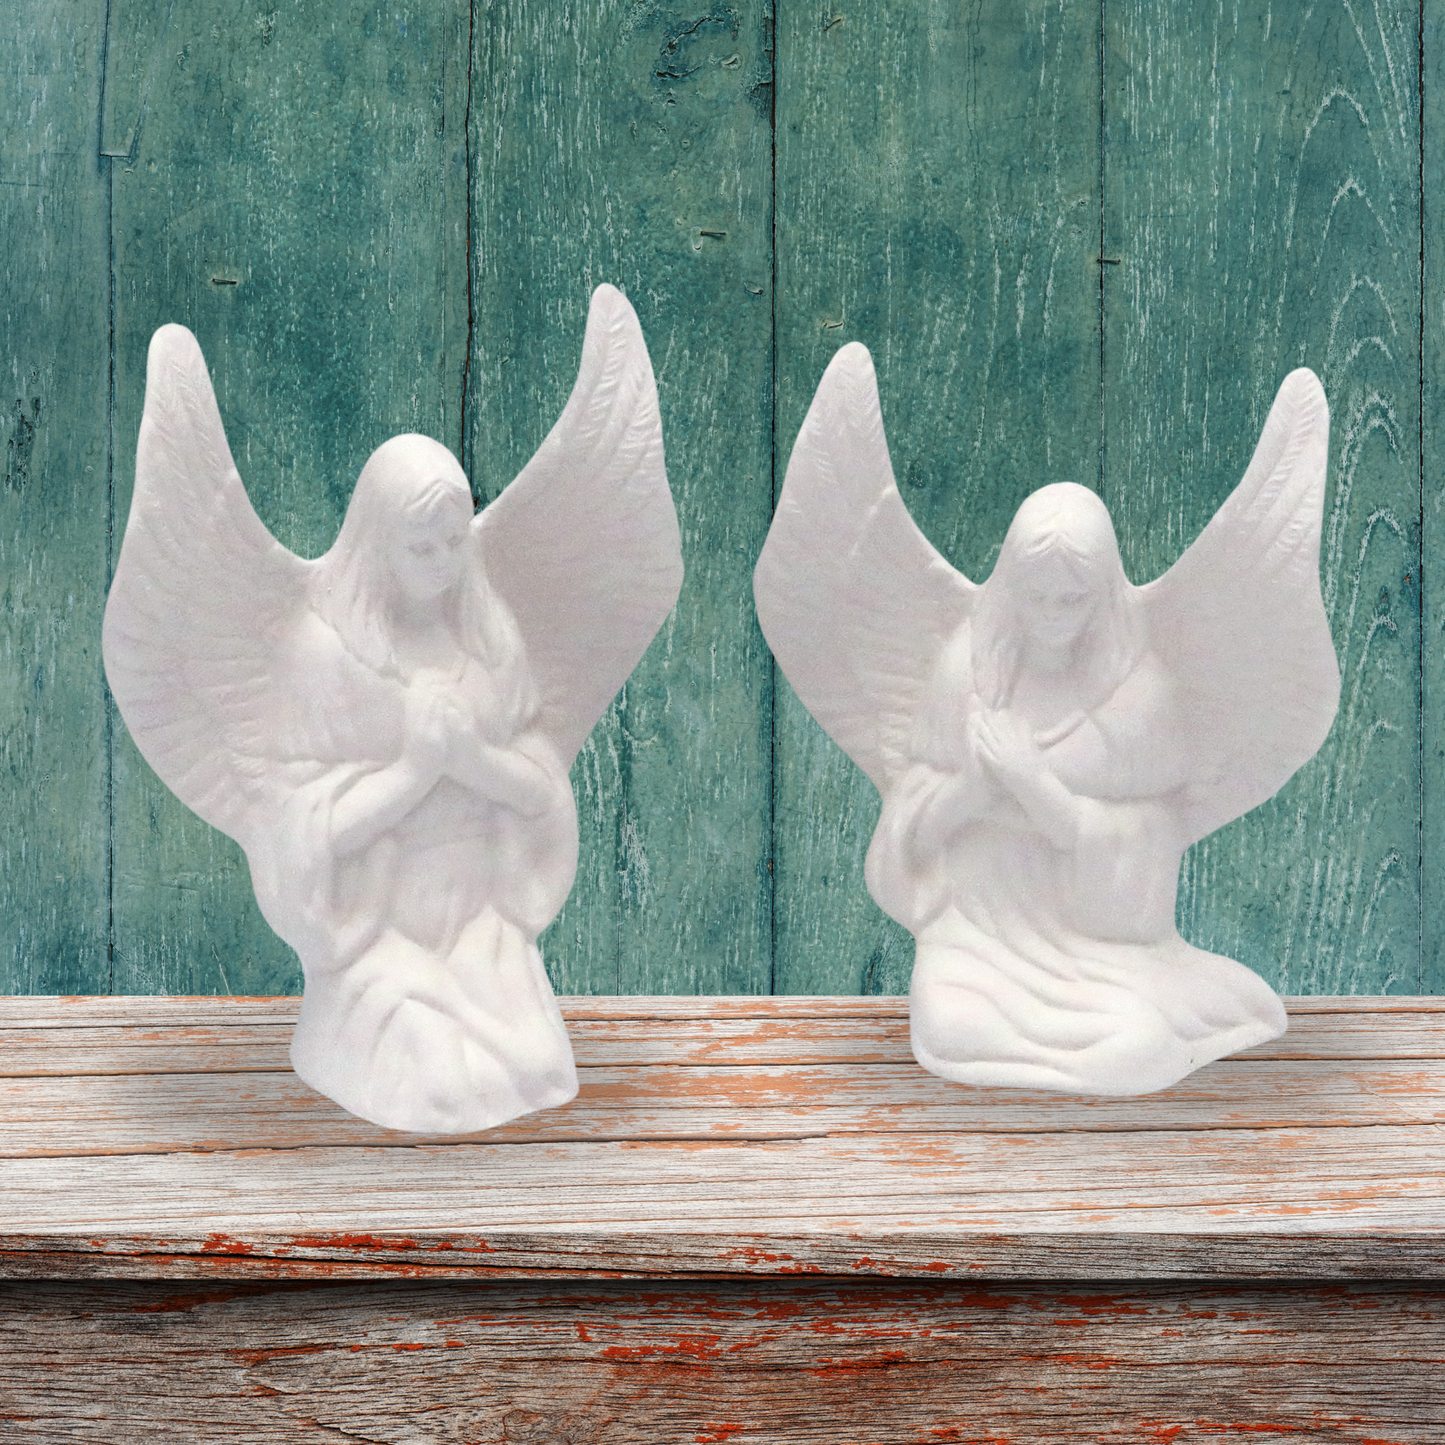 Small Ready to Paint Ceramic Angel Figurines Sitting and Kneeling, Unpainted Ceramic Angel Statues